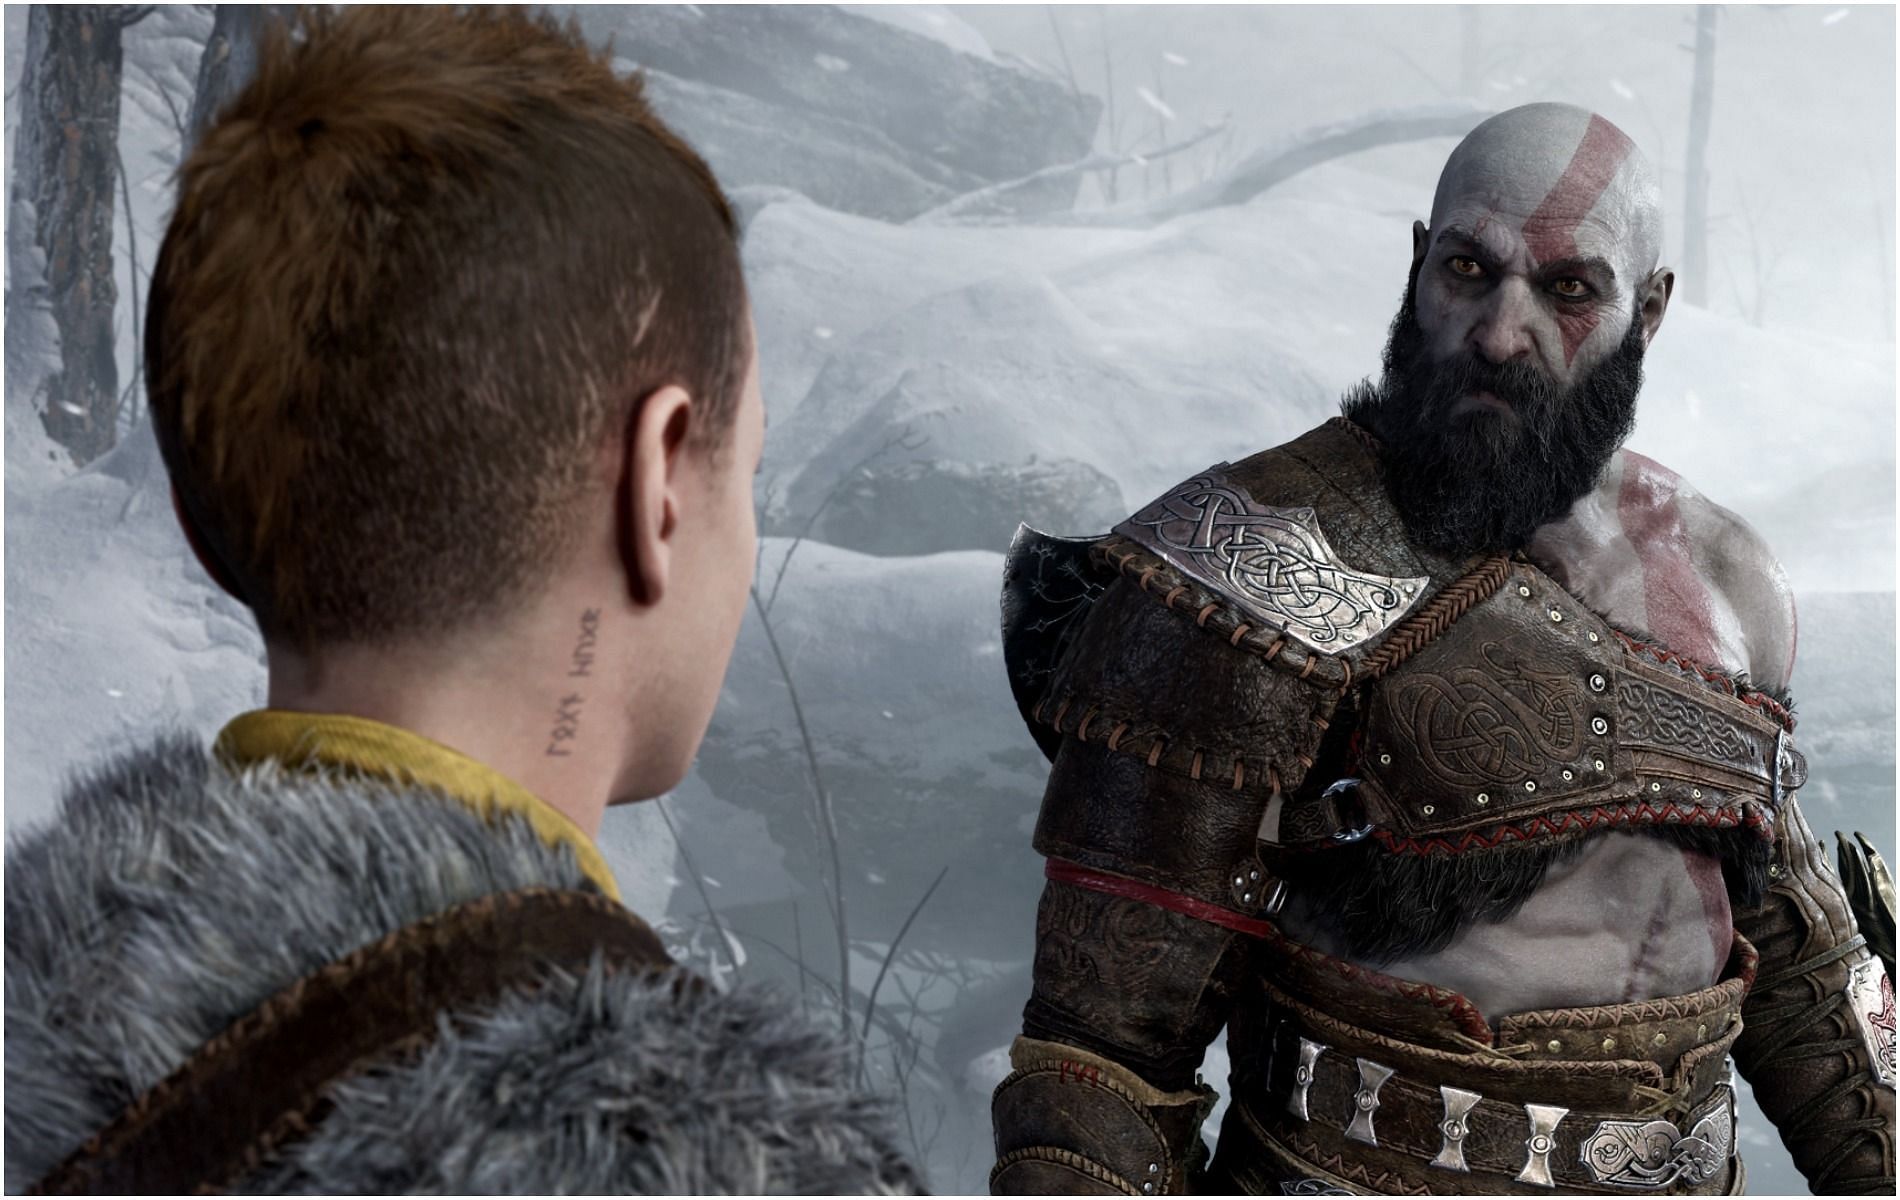 Ranking the God Of War Games from Worst to Best - KeenGamer